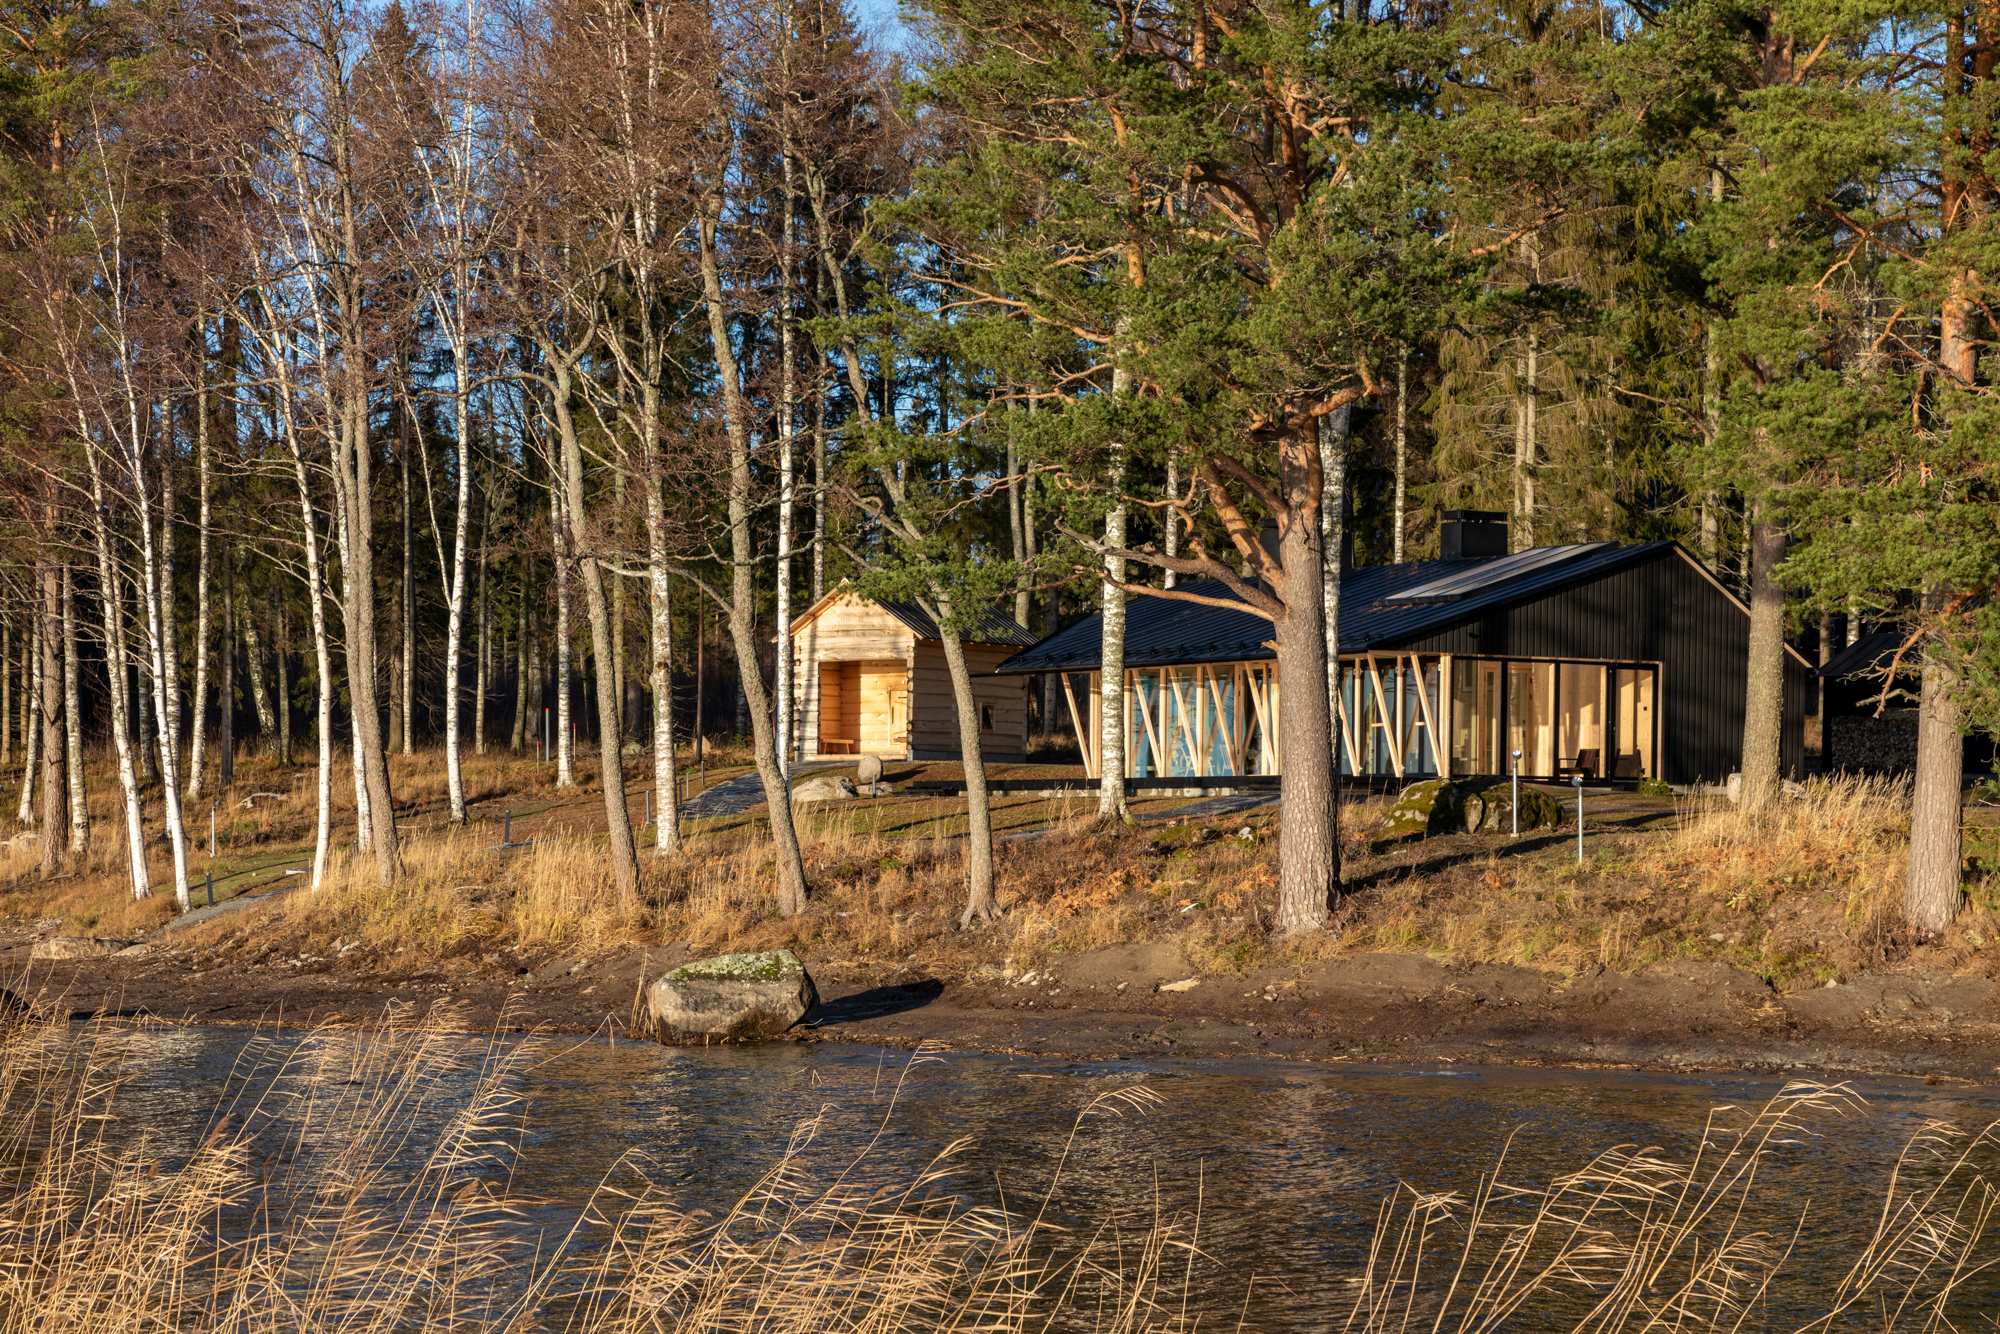 Two new wooden saunas have been built by the lake to complement the historic Rauhalinna Castle